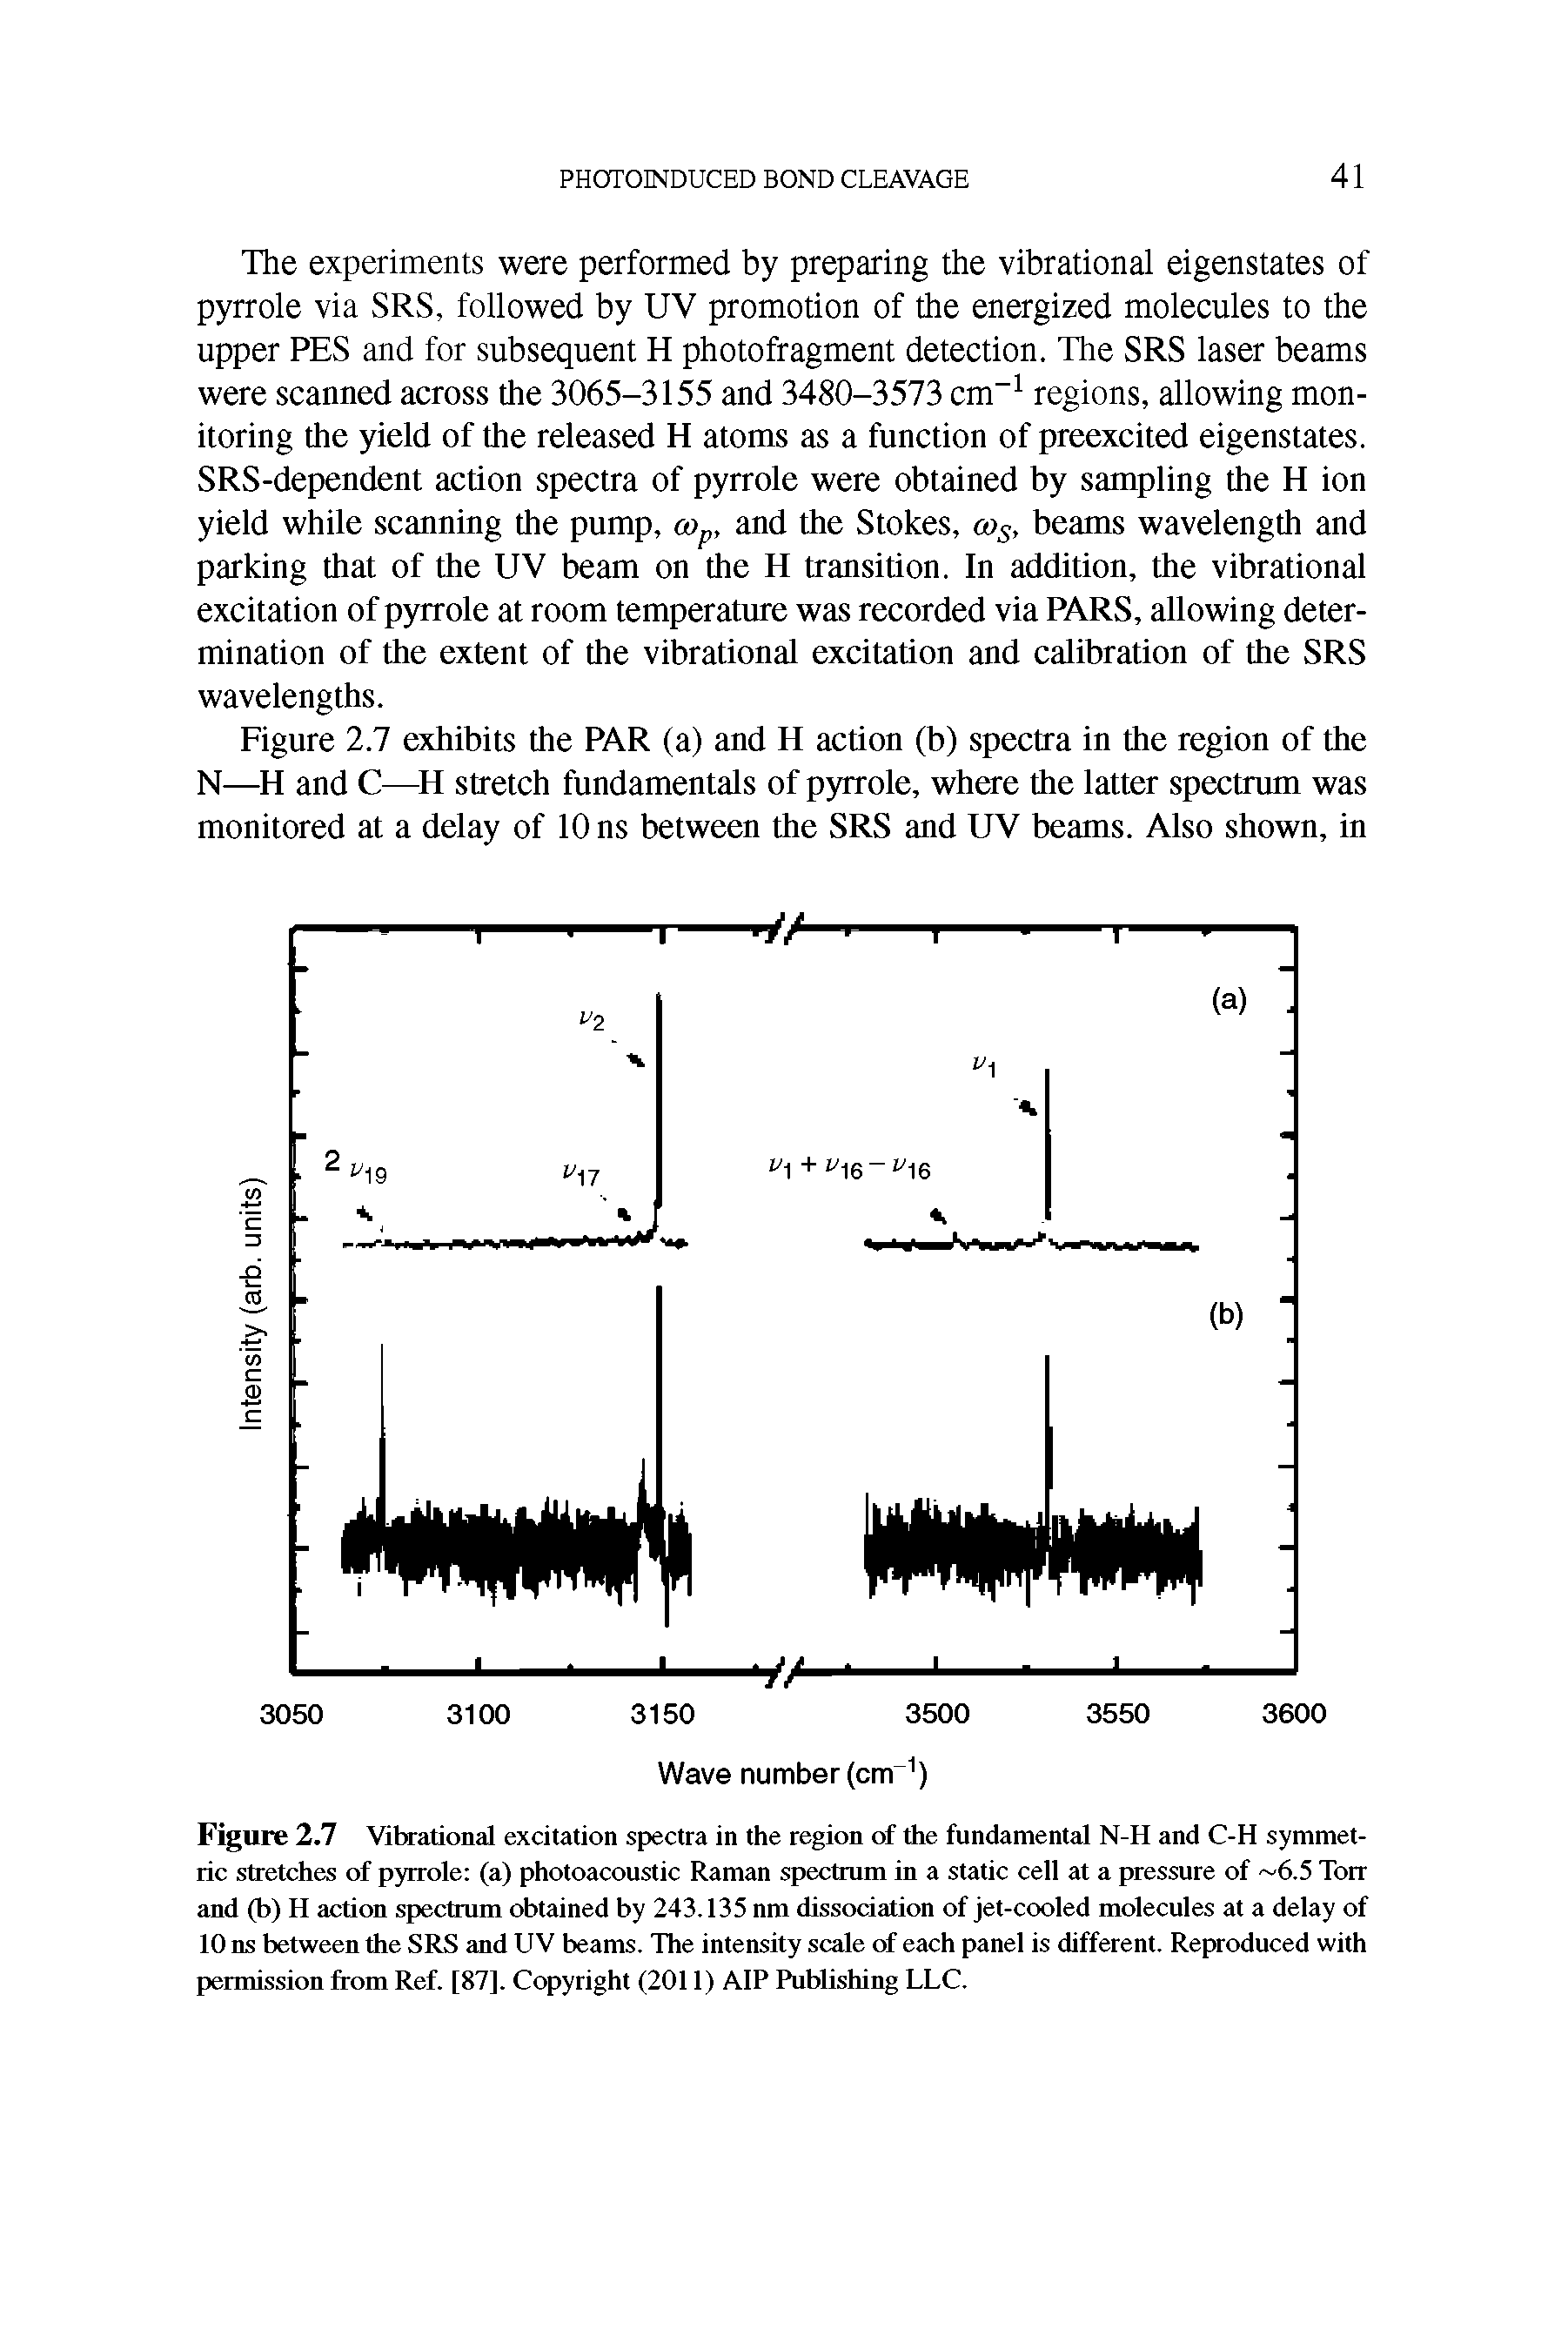 Figure 2.7 Vibrational excitation spectra in the region of the fundamental N-H and C-H symmetric stretches of pyrrole (a) photoacoustic Raman spectrum in a static cell at a pressure of 6.5 Torr and (b) H action spectrum obtained by 243.135 nm dissociation of jet-cooled molecules at a delay of 10 ns between the SRS and UV beams. The intensity scale of each panel is different. Reproduced with permission from Ref. [87]. Copyright (2011) AlP Publishing LLC.